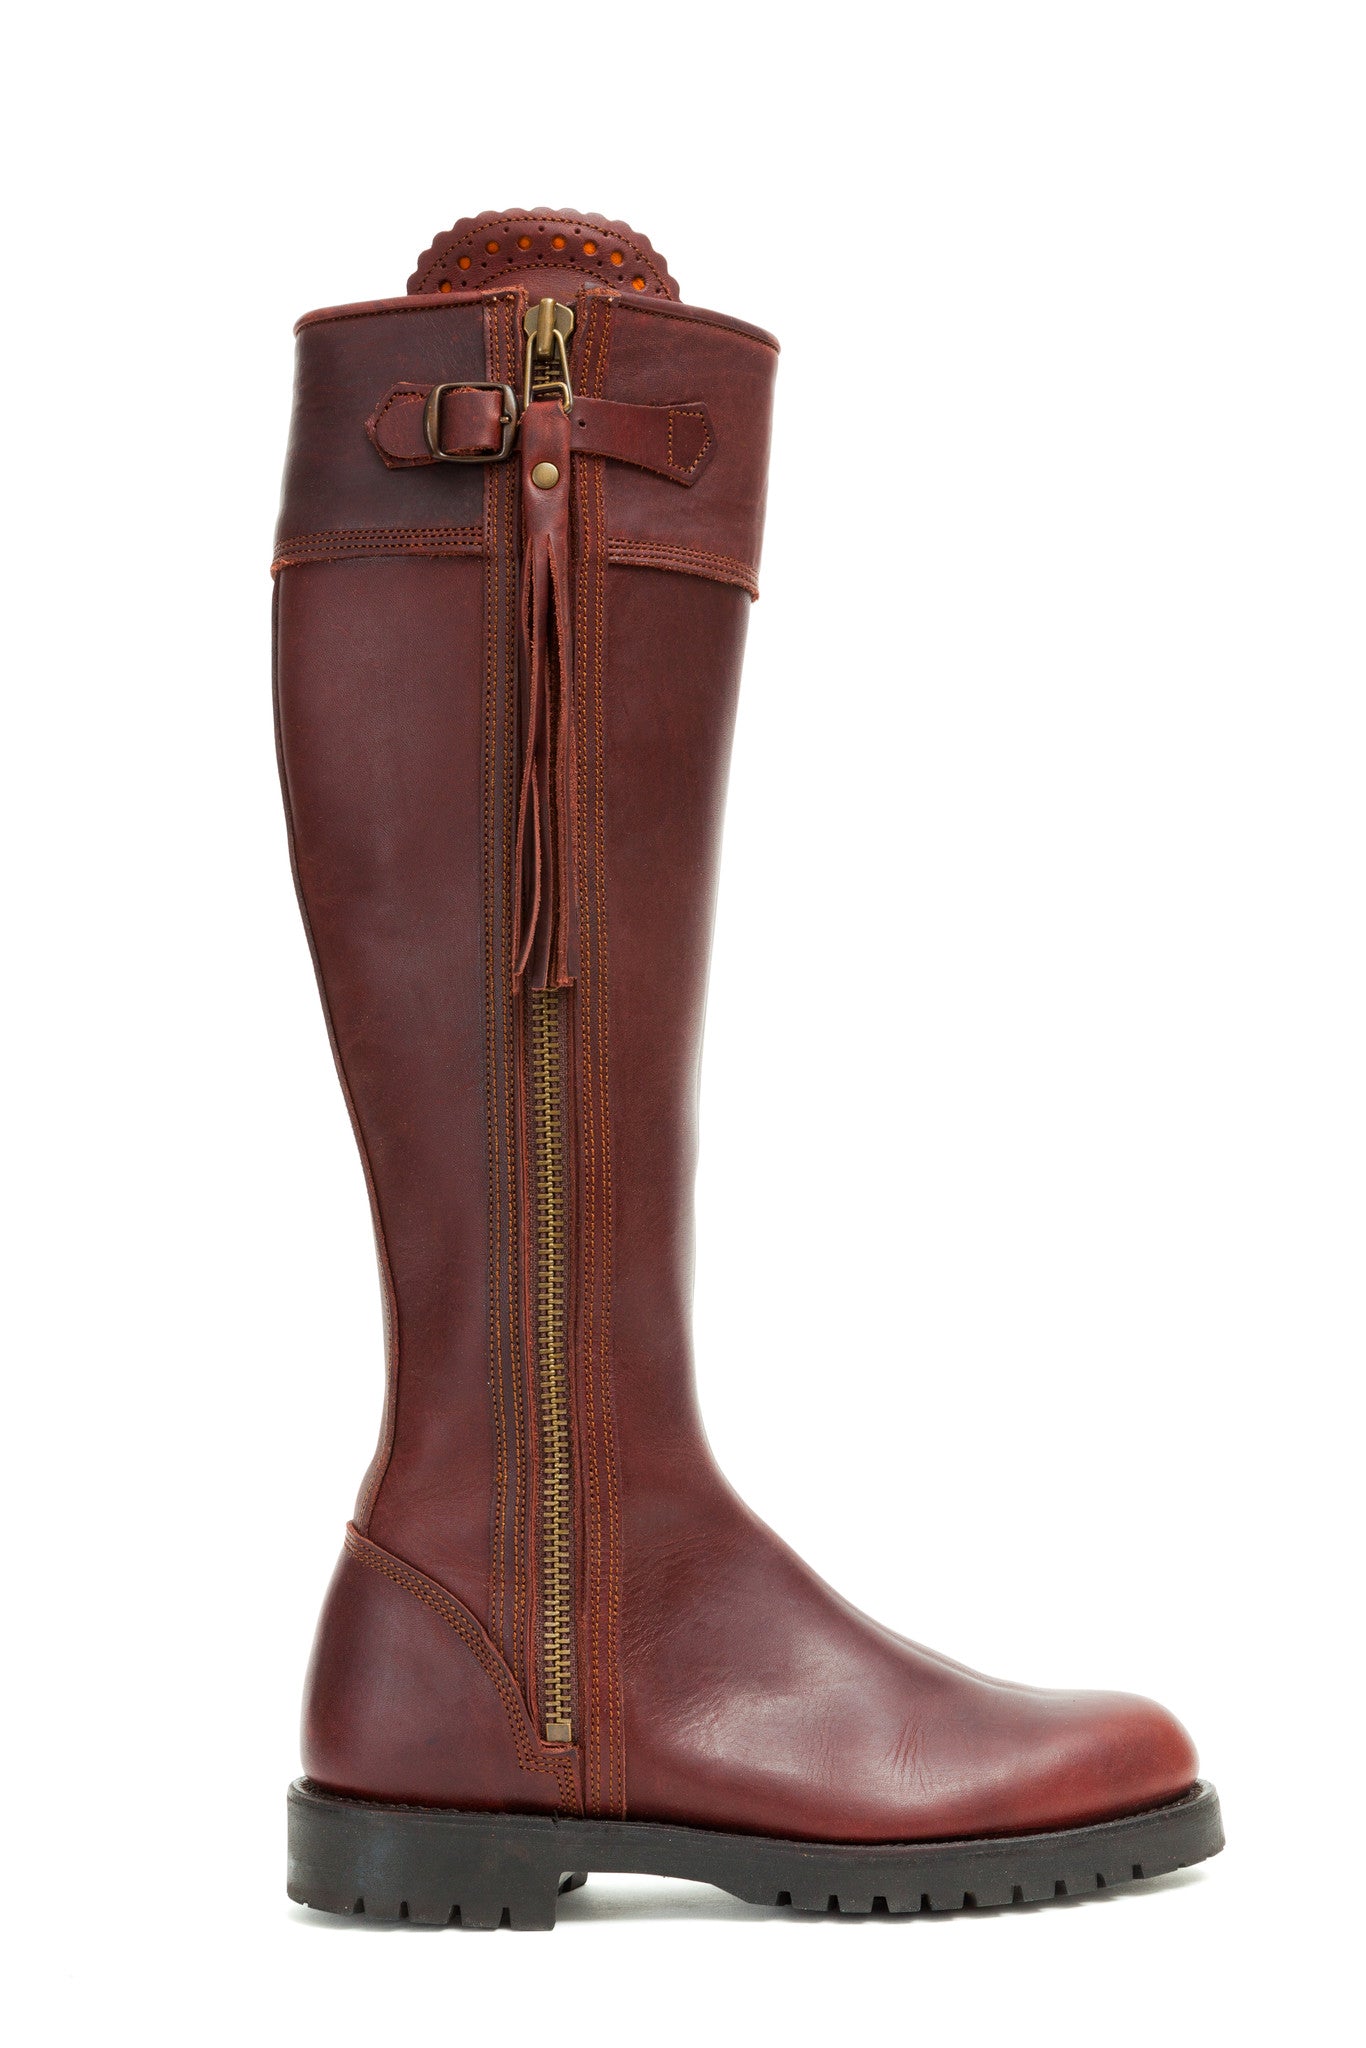 Long tassel BOOT, Footwear, Penelope Chilvers - Hickman & Bousfield, Safari and Travel Clothing